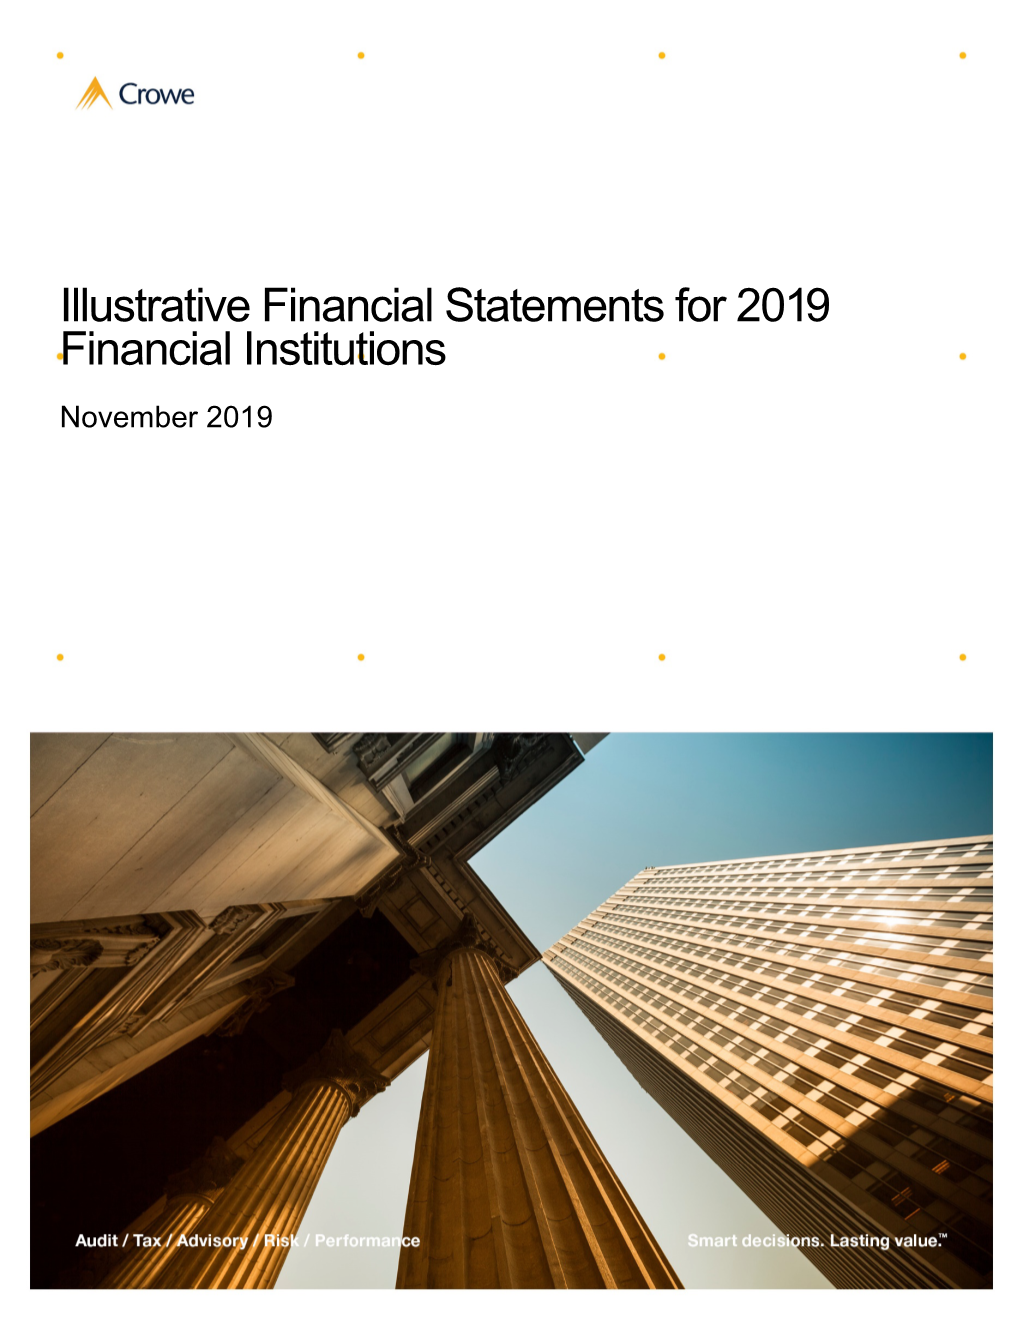 2019 Illustrative Financial Statements for Financial Institutions